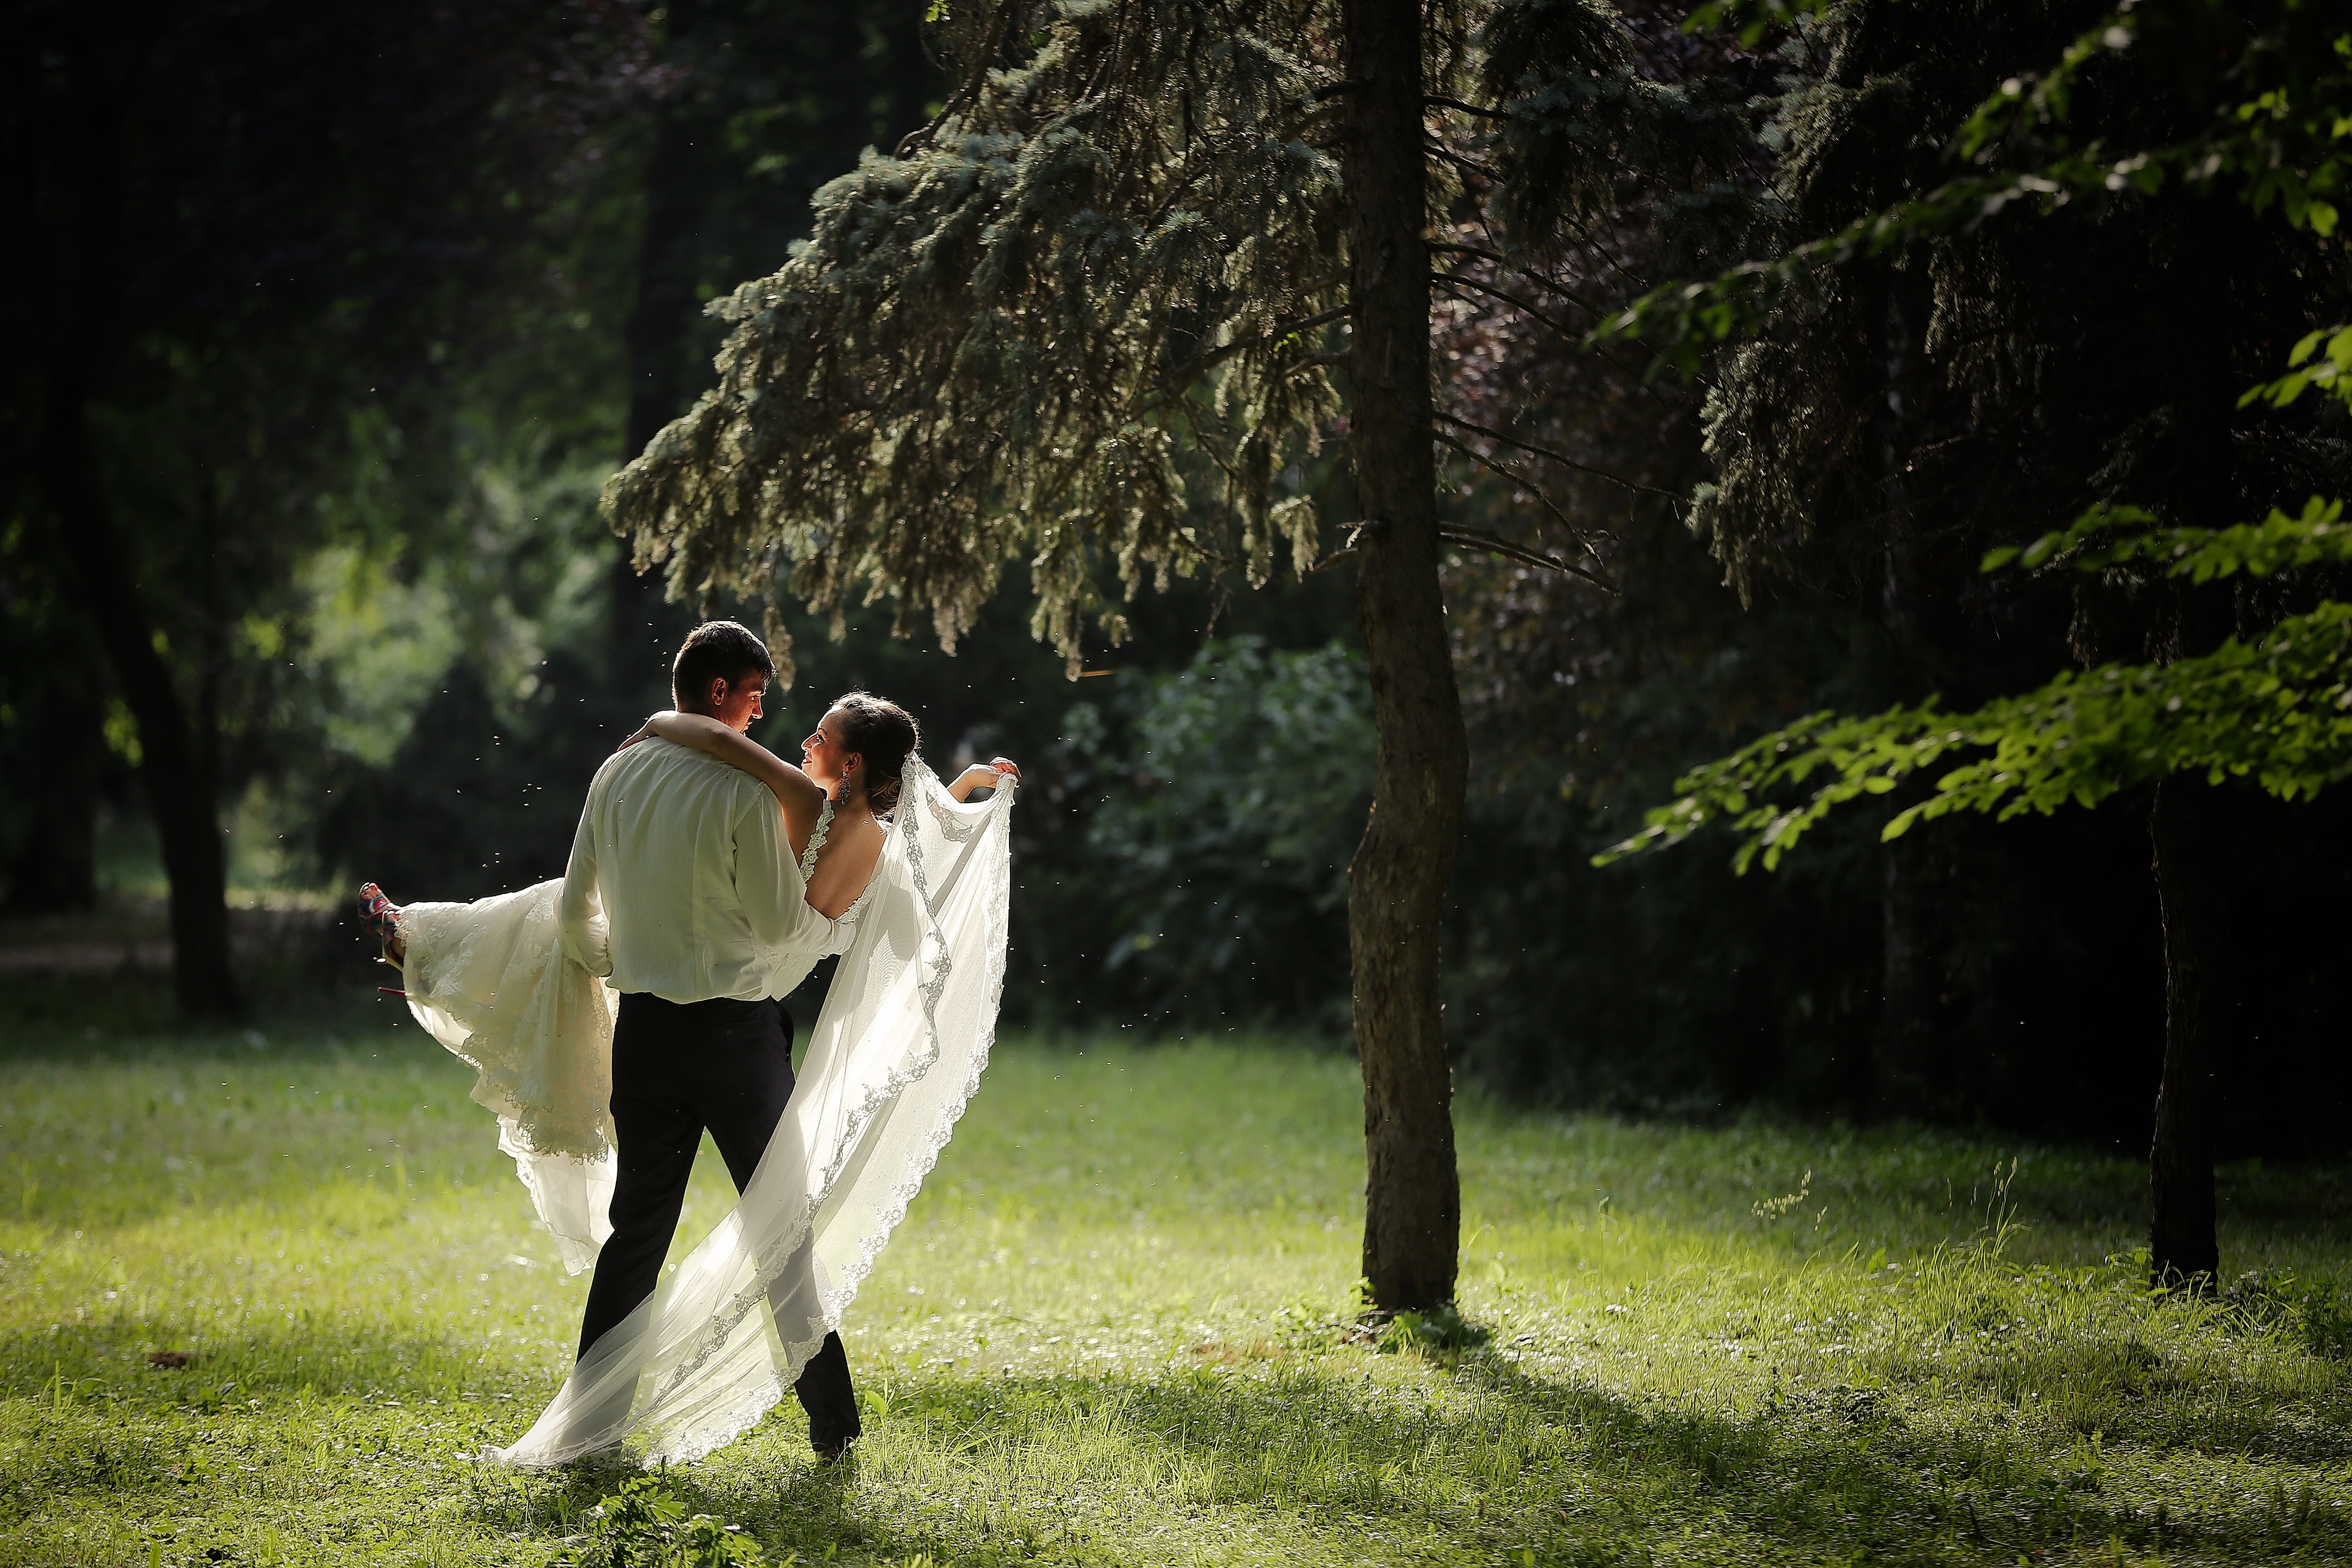 Free picture: moment, spectacular, bride, groom, wedding dress, forest ...